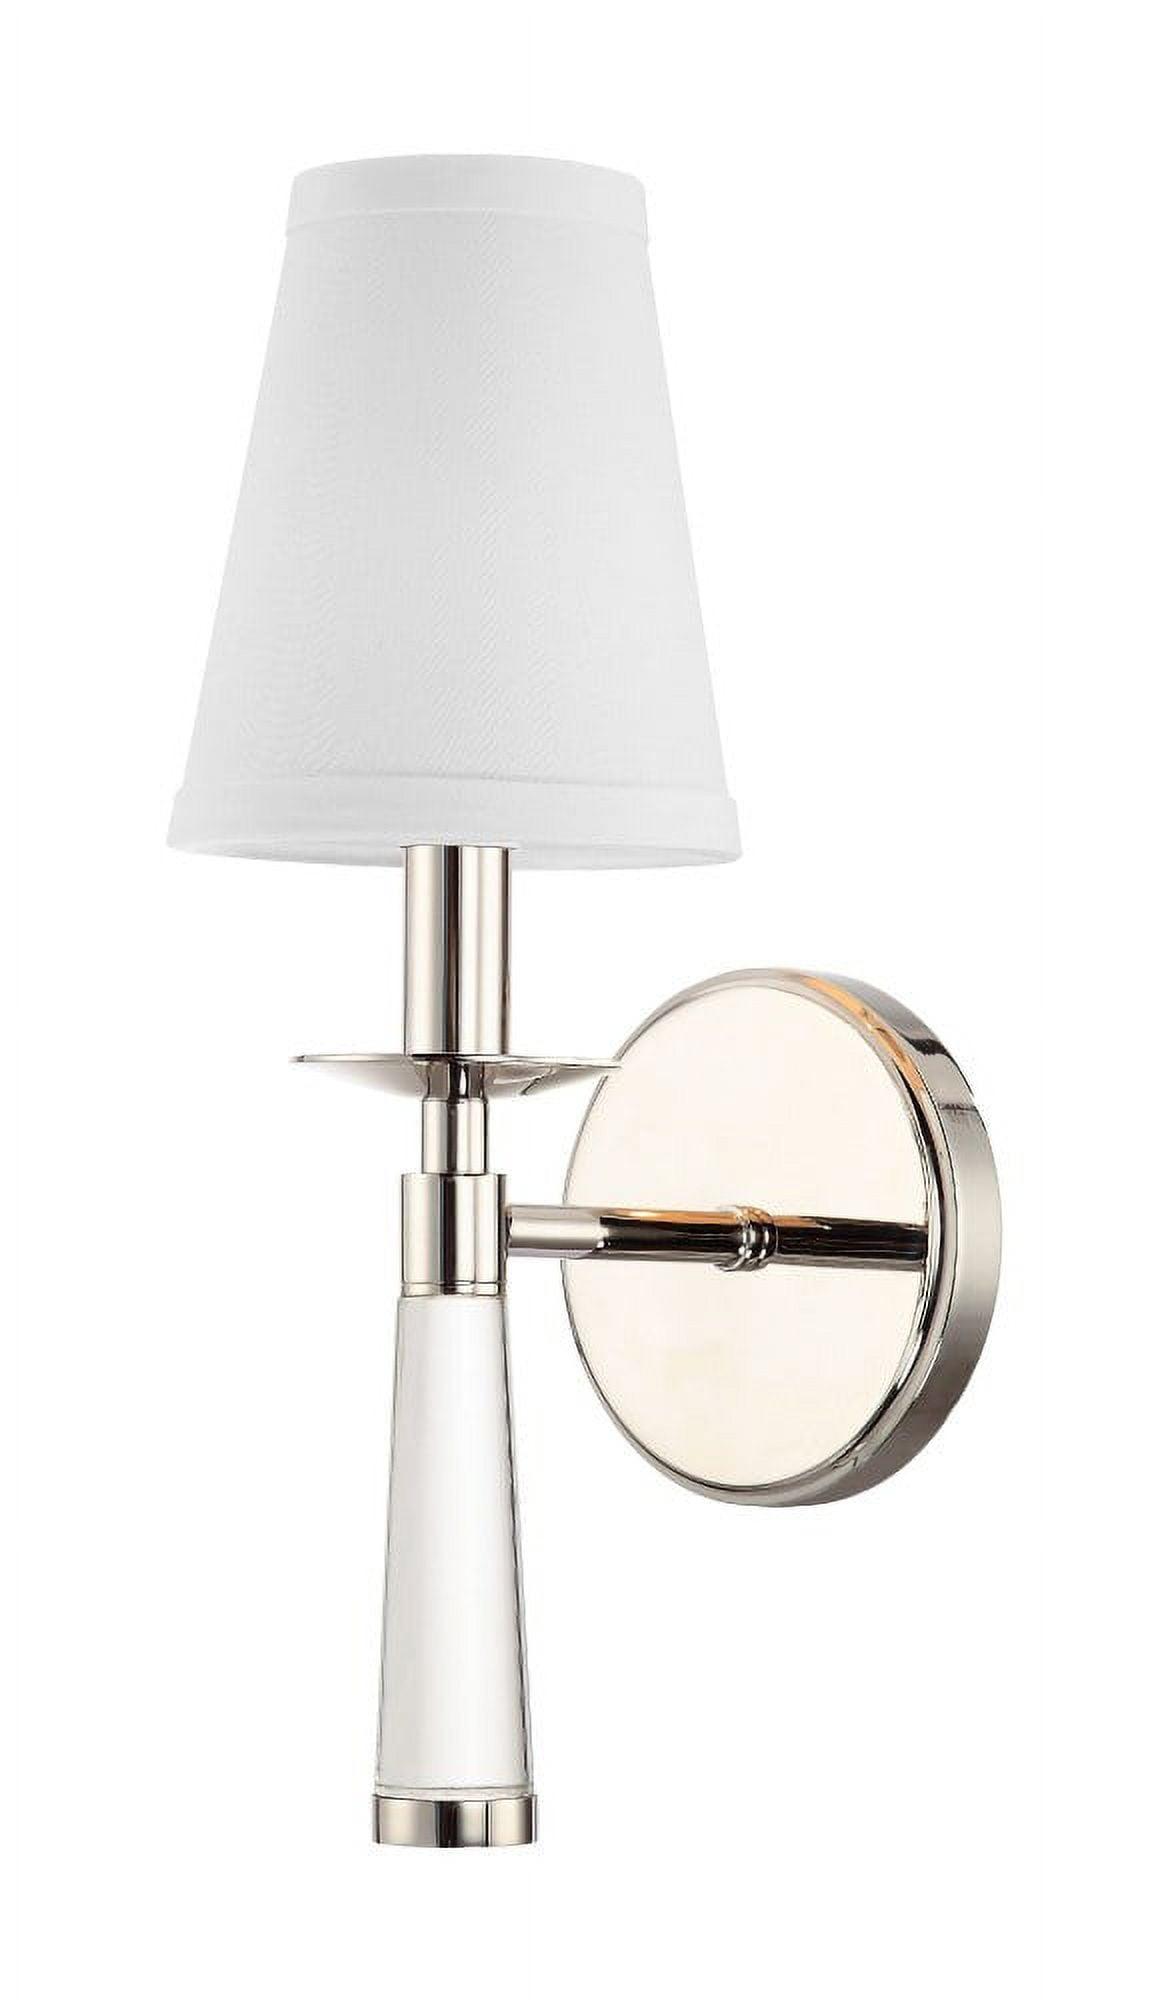 Elegant Polished Nickel Dimmable Sconce with White Silk Bell Shade